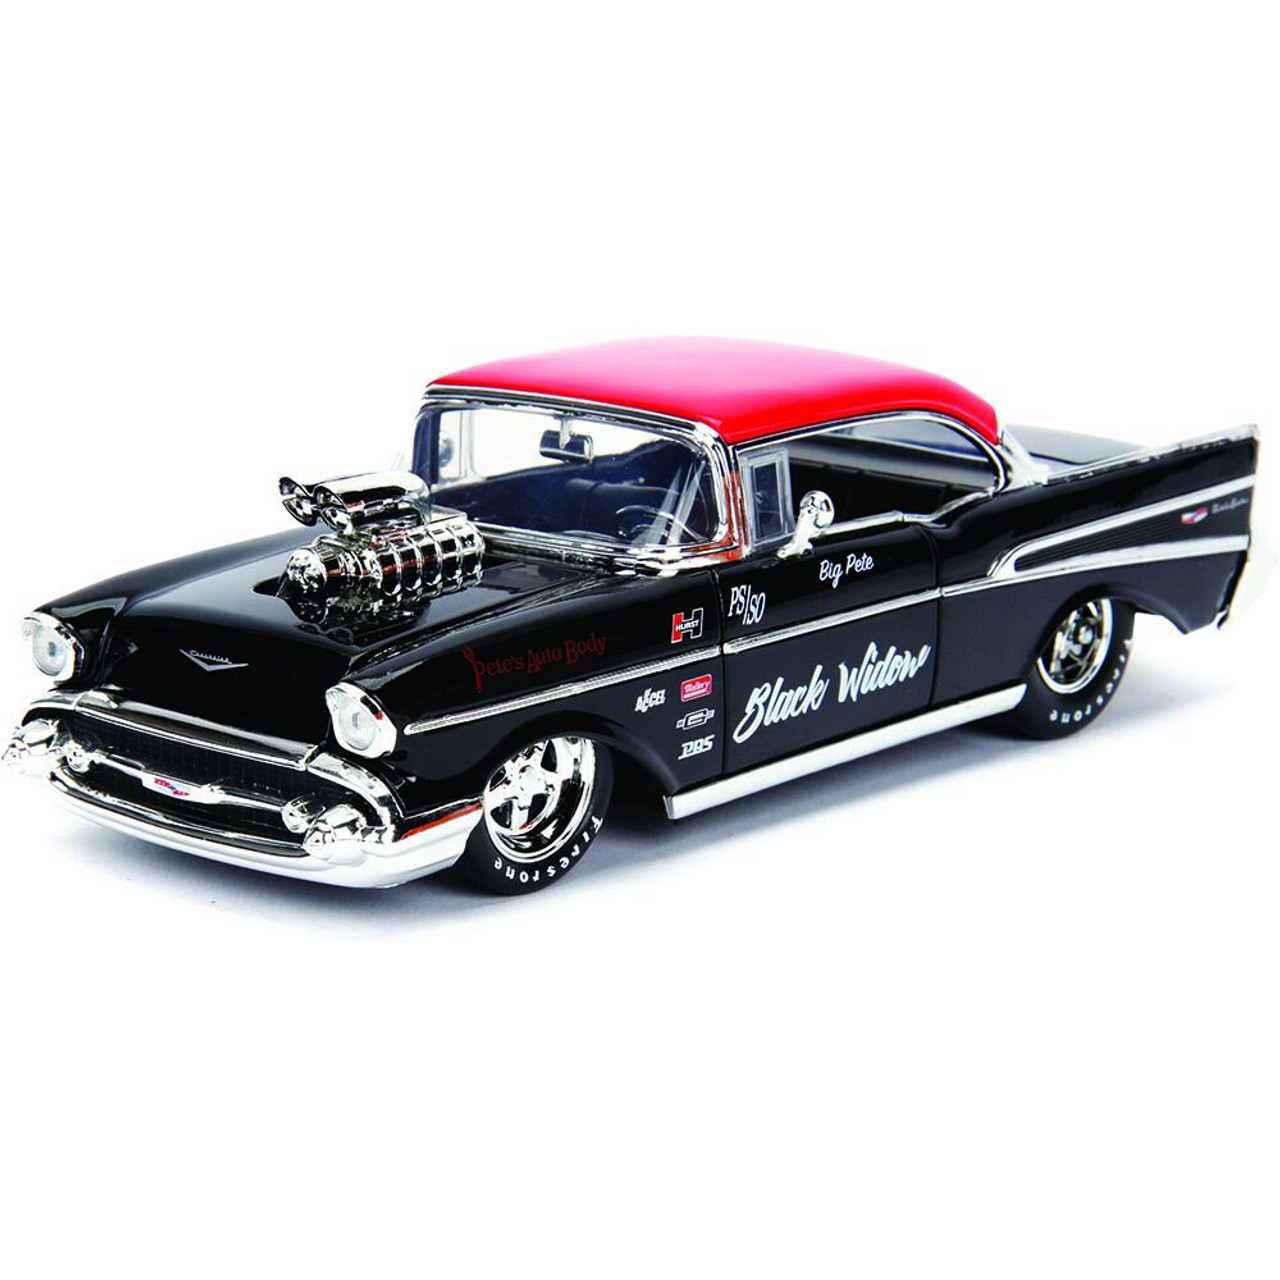 1957 Chevy Bel Air - Big Time Muscle 1:24 Scale Diecast Model by Toys | Fairfield Collectibles - The #1 Source For High Quality Diecast Scale Model Cars